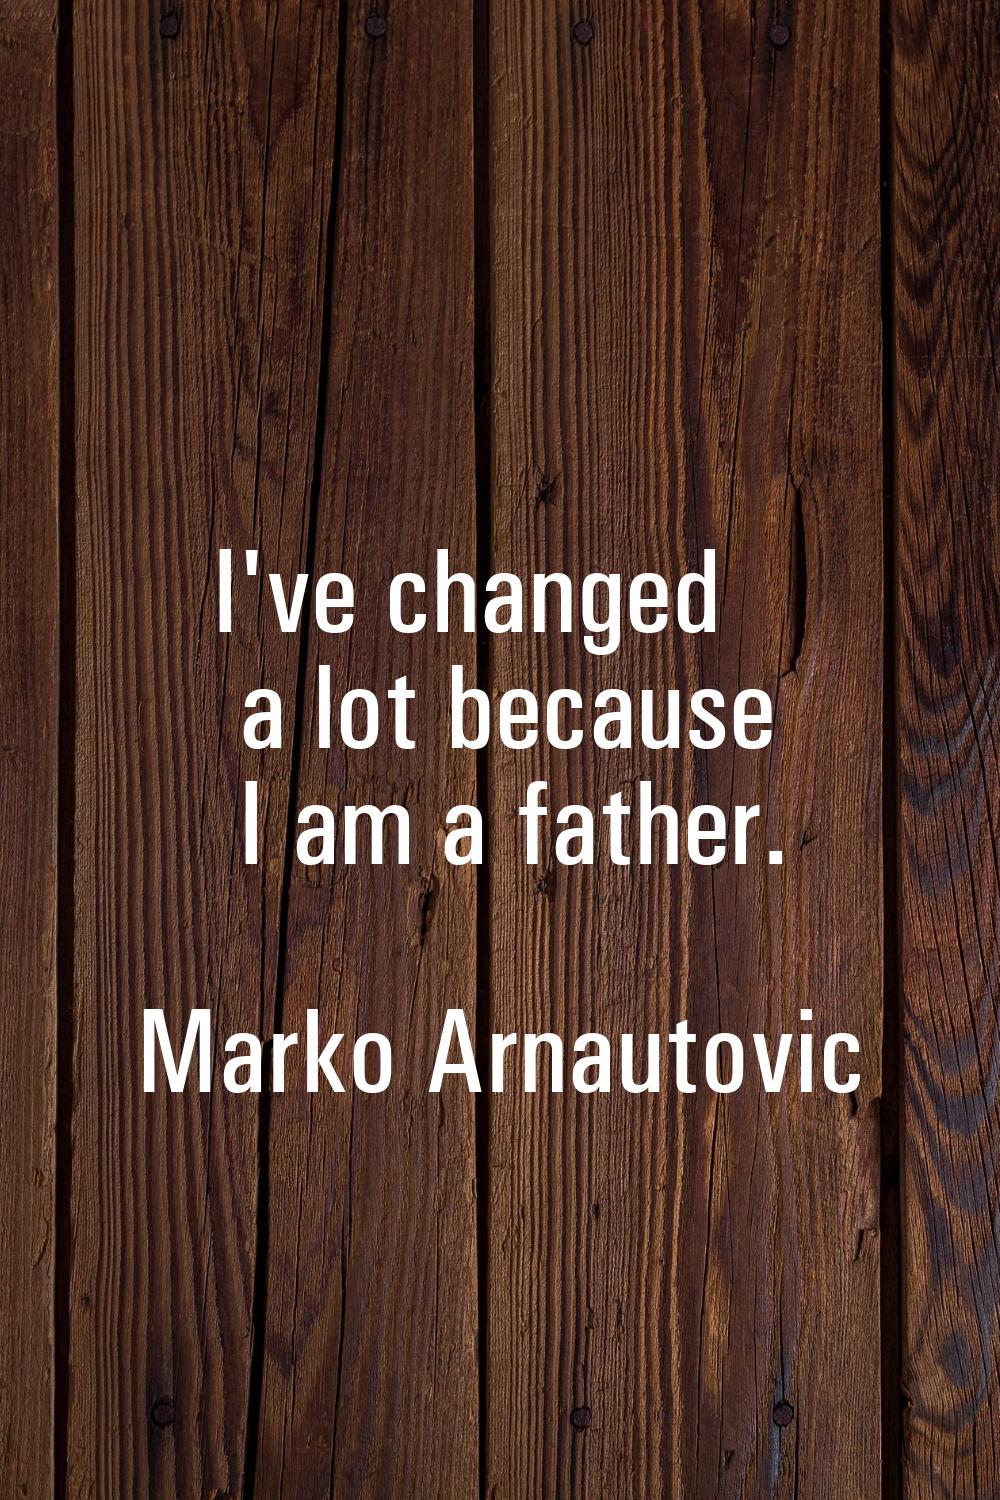 I've changed a lot because I am a father.